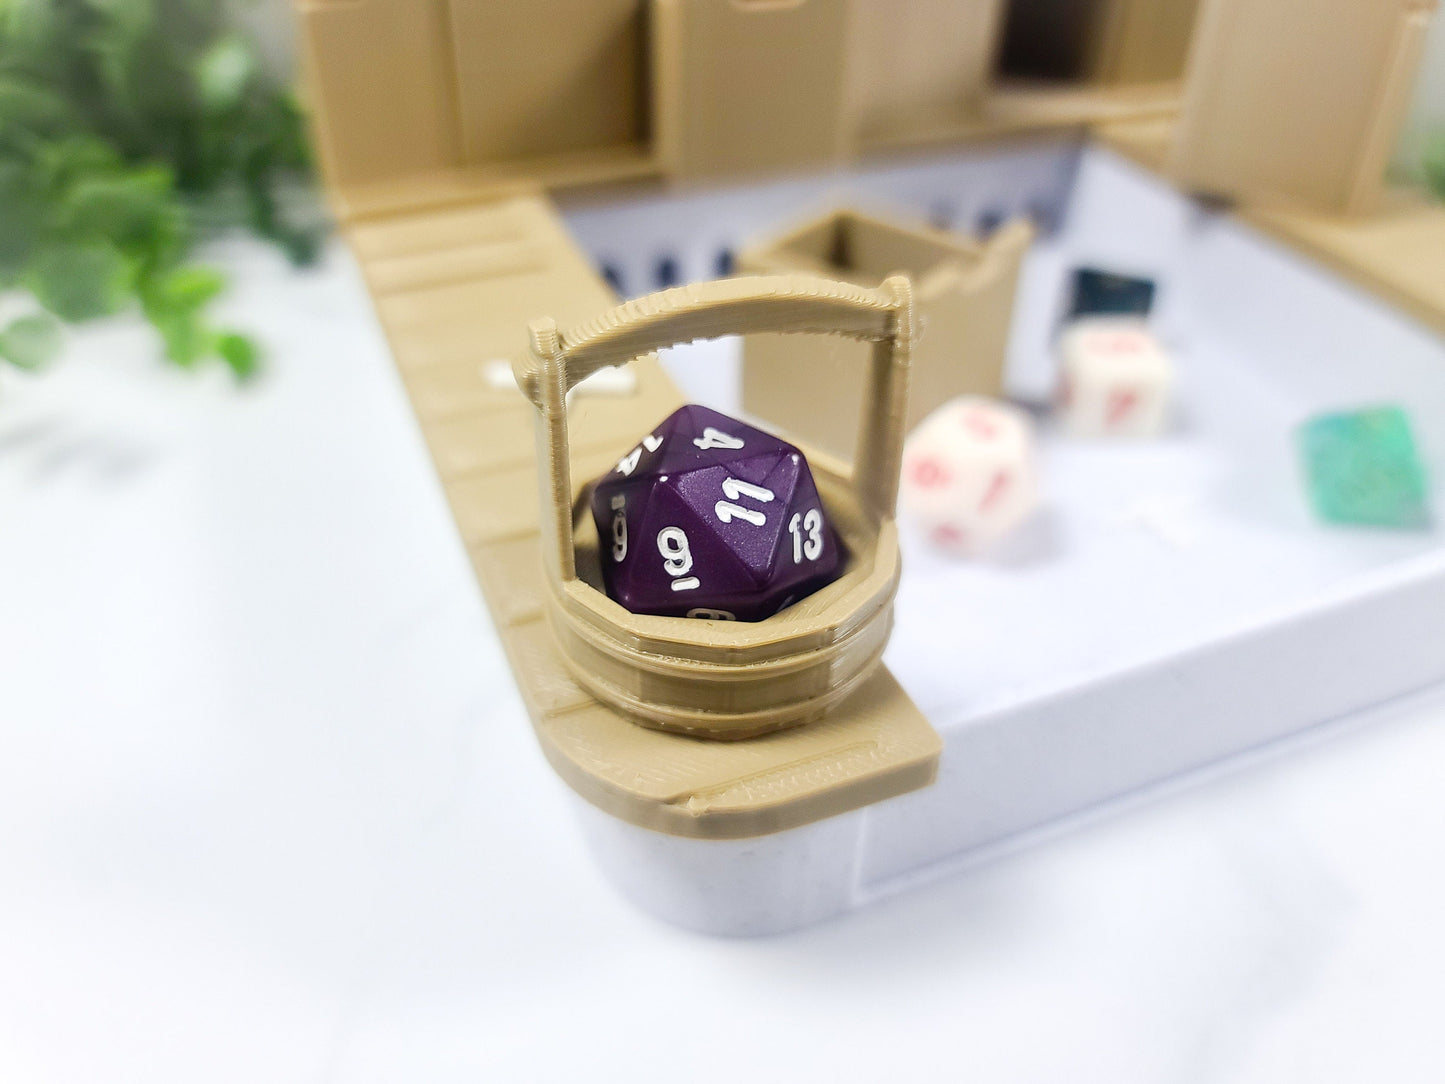 3d printed Dice Rolling Tray, Unique Dice Trays, 3d Printed Tabletop Accessory, Role-playing, Dice Organizer